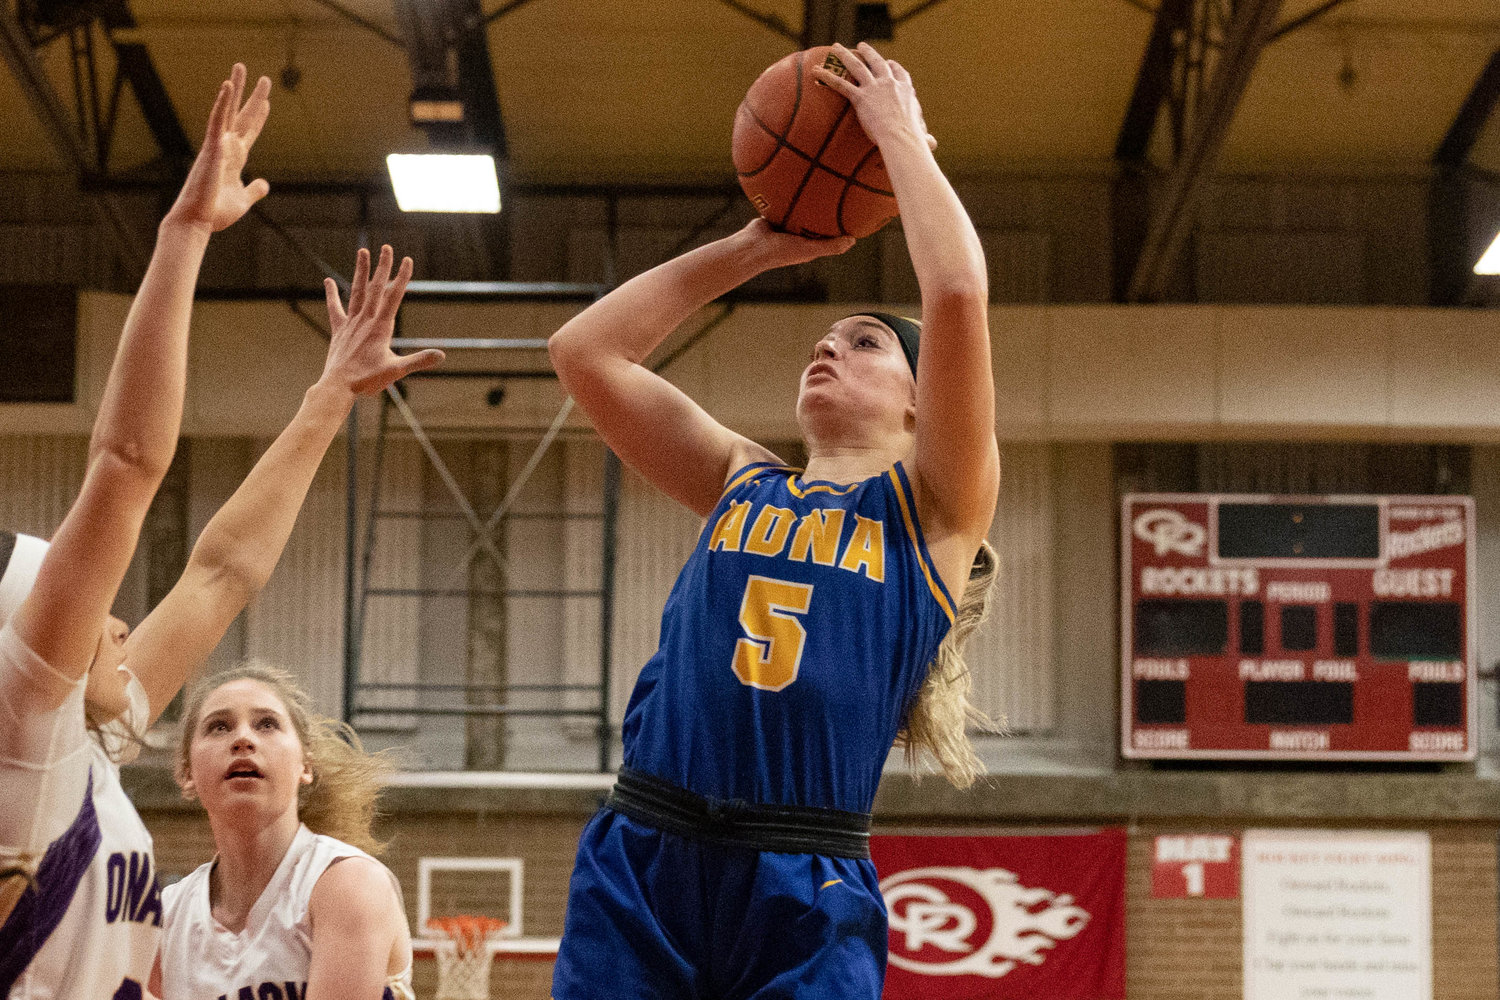 Adna guard Kaylin Todd takes a jumpshot against Onalaska in the 2B District IV playoffs at Castle Rock Feb. 17.